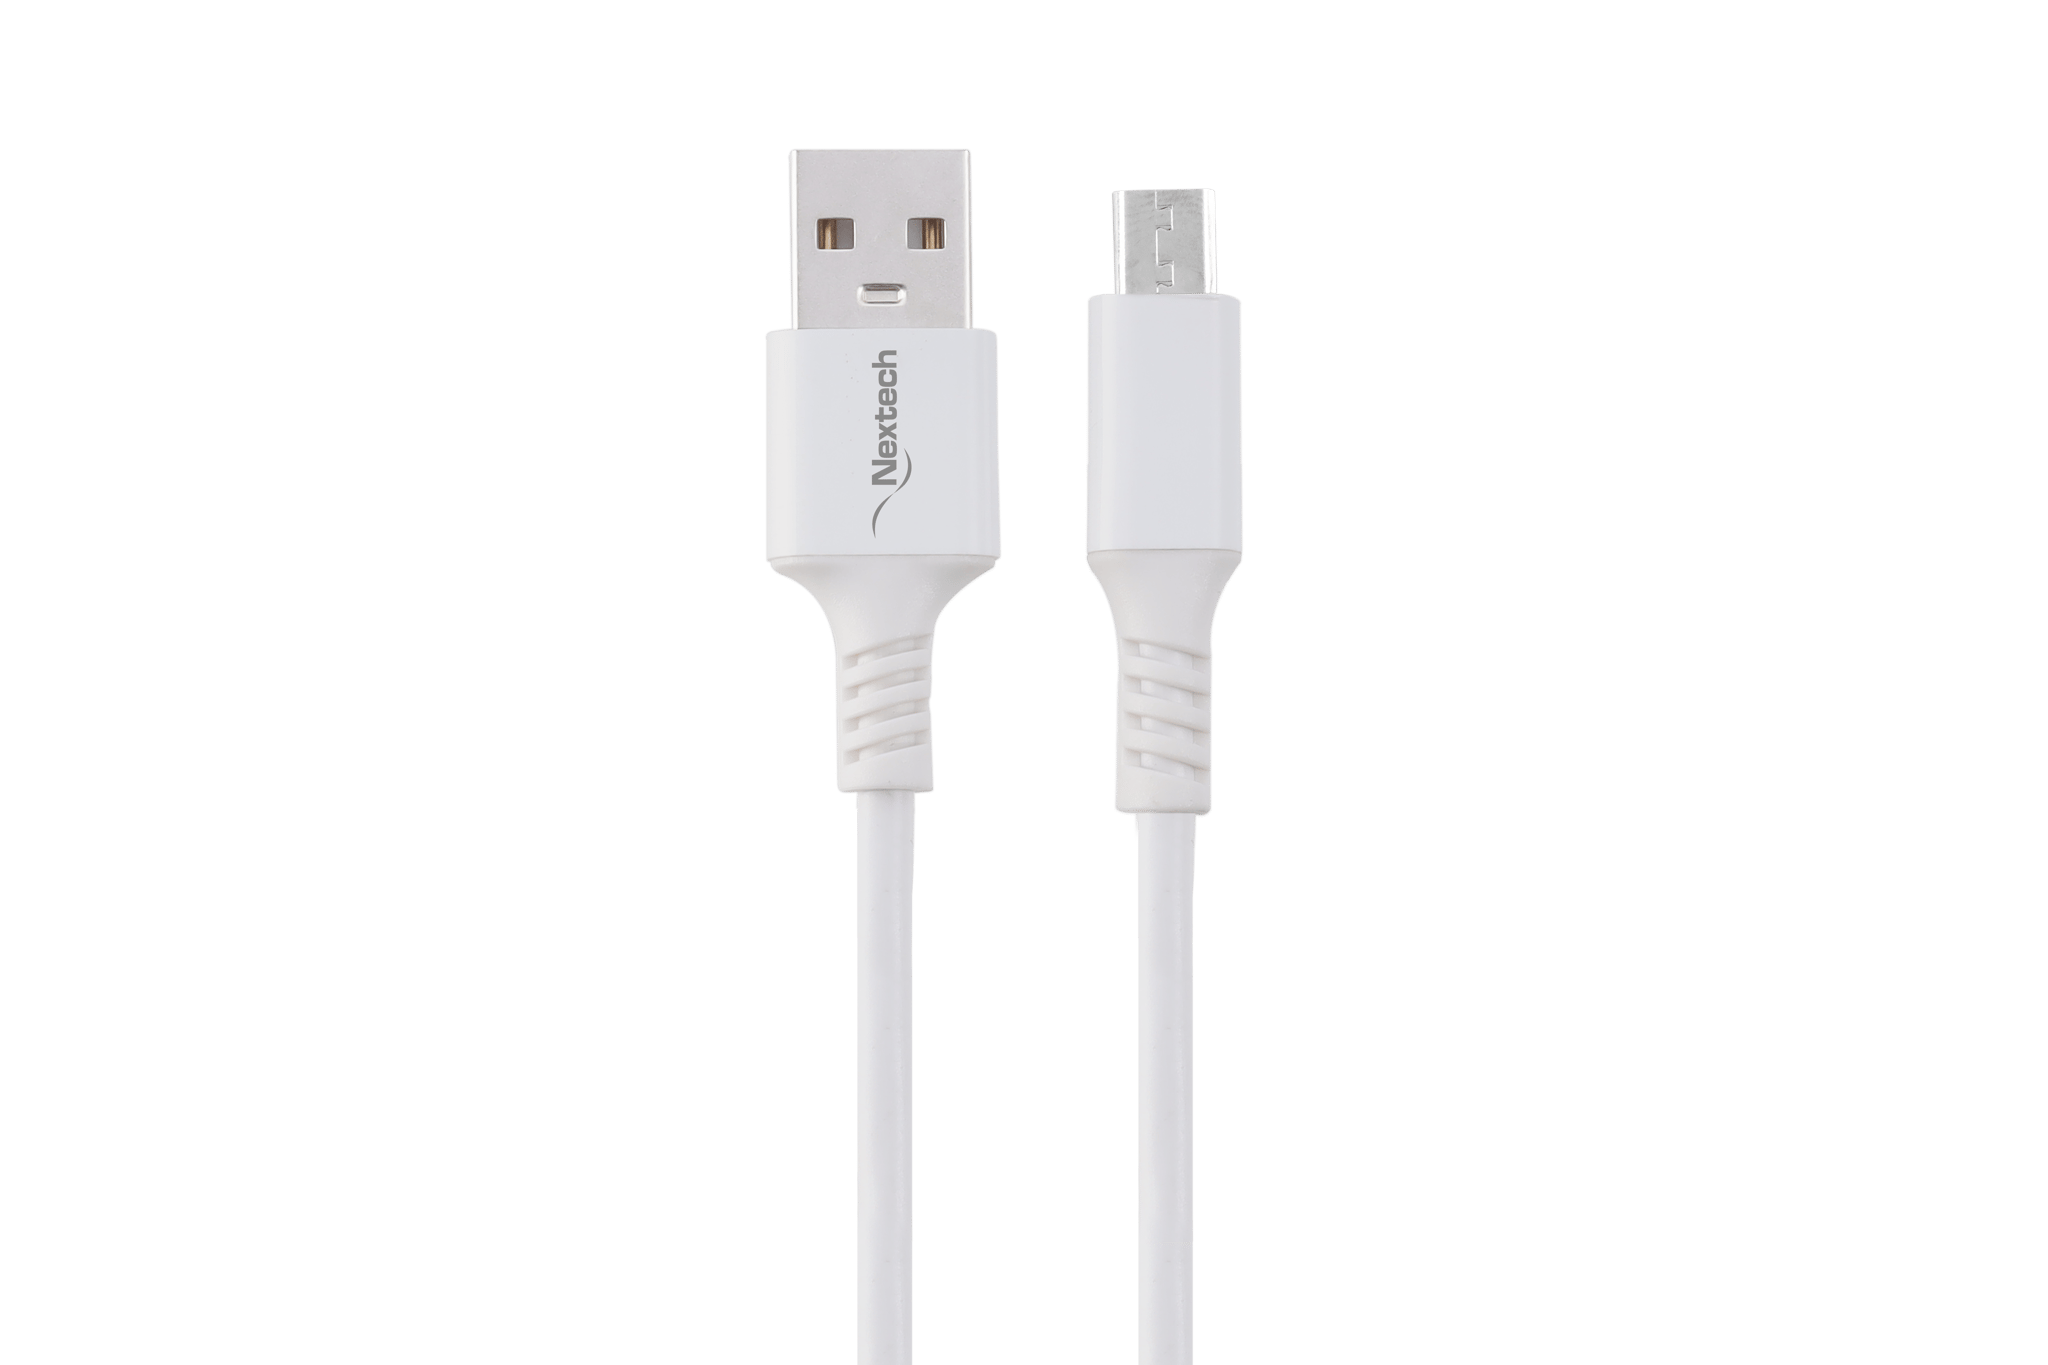 Nextech 2.4A Fast Sync & Charge Micro USB Cable 1M